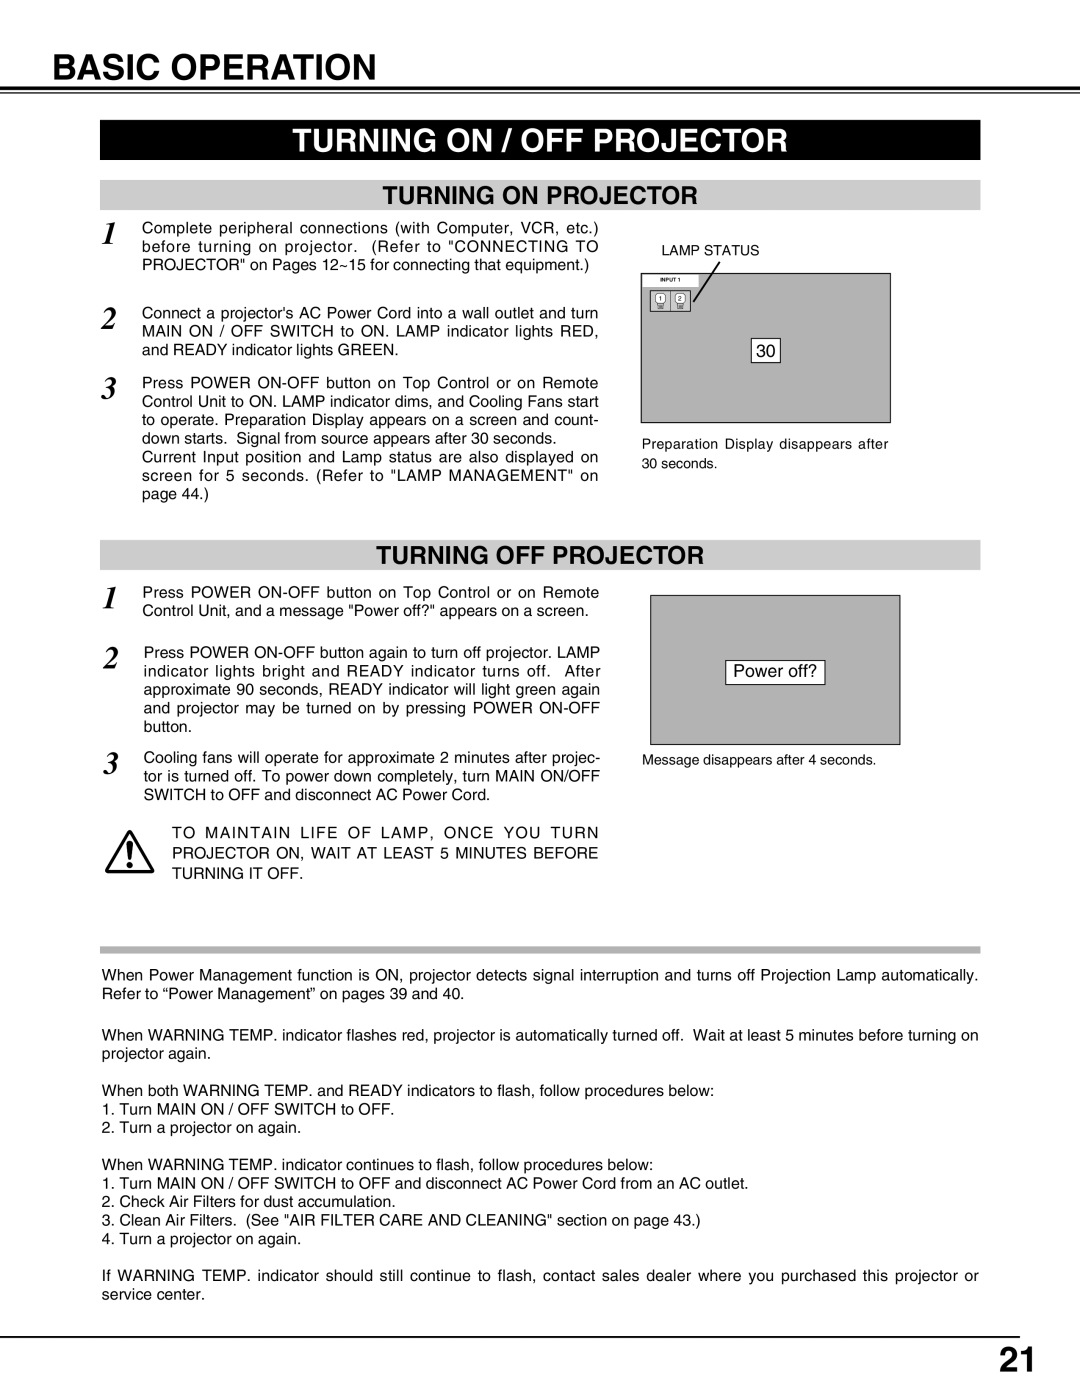 Christie Digital Systems 38-MX2001-01 user manual Basic Operation, Turning On / Off Projector, Turning On Projector 